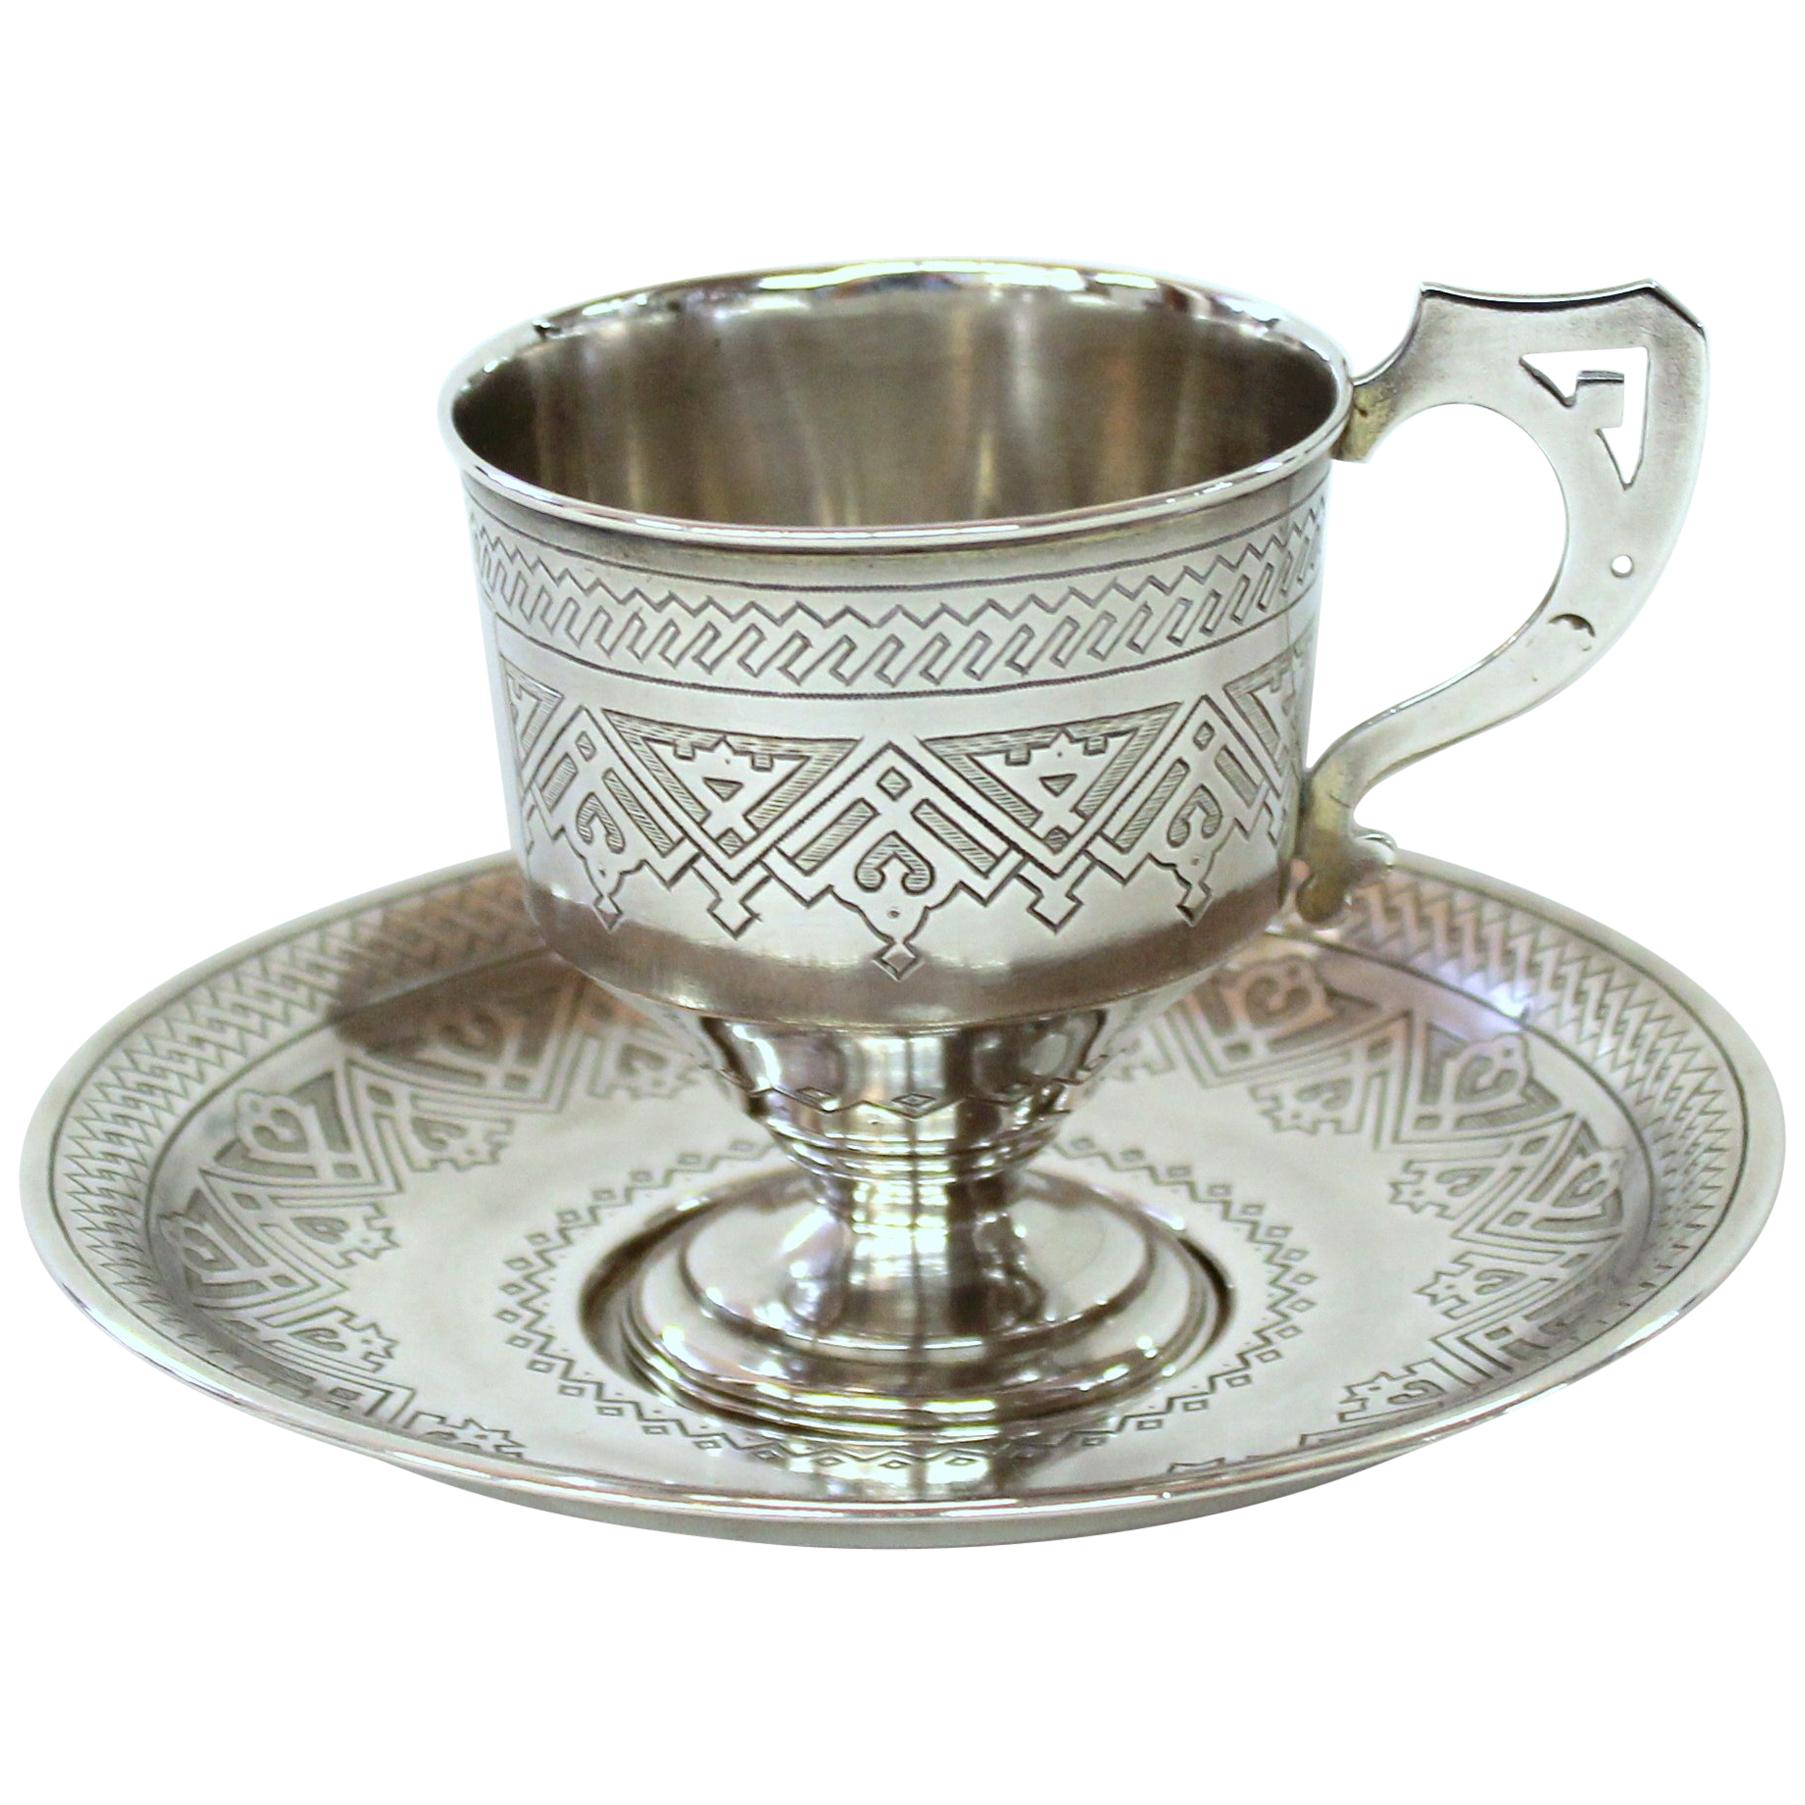 Antique Imperial Russian Silver Hand Engraved Cup and Saucer, Aleksandr Fuld For Sale